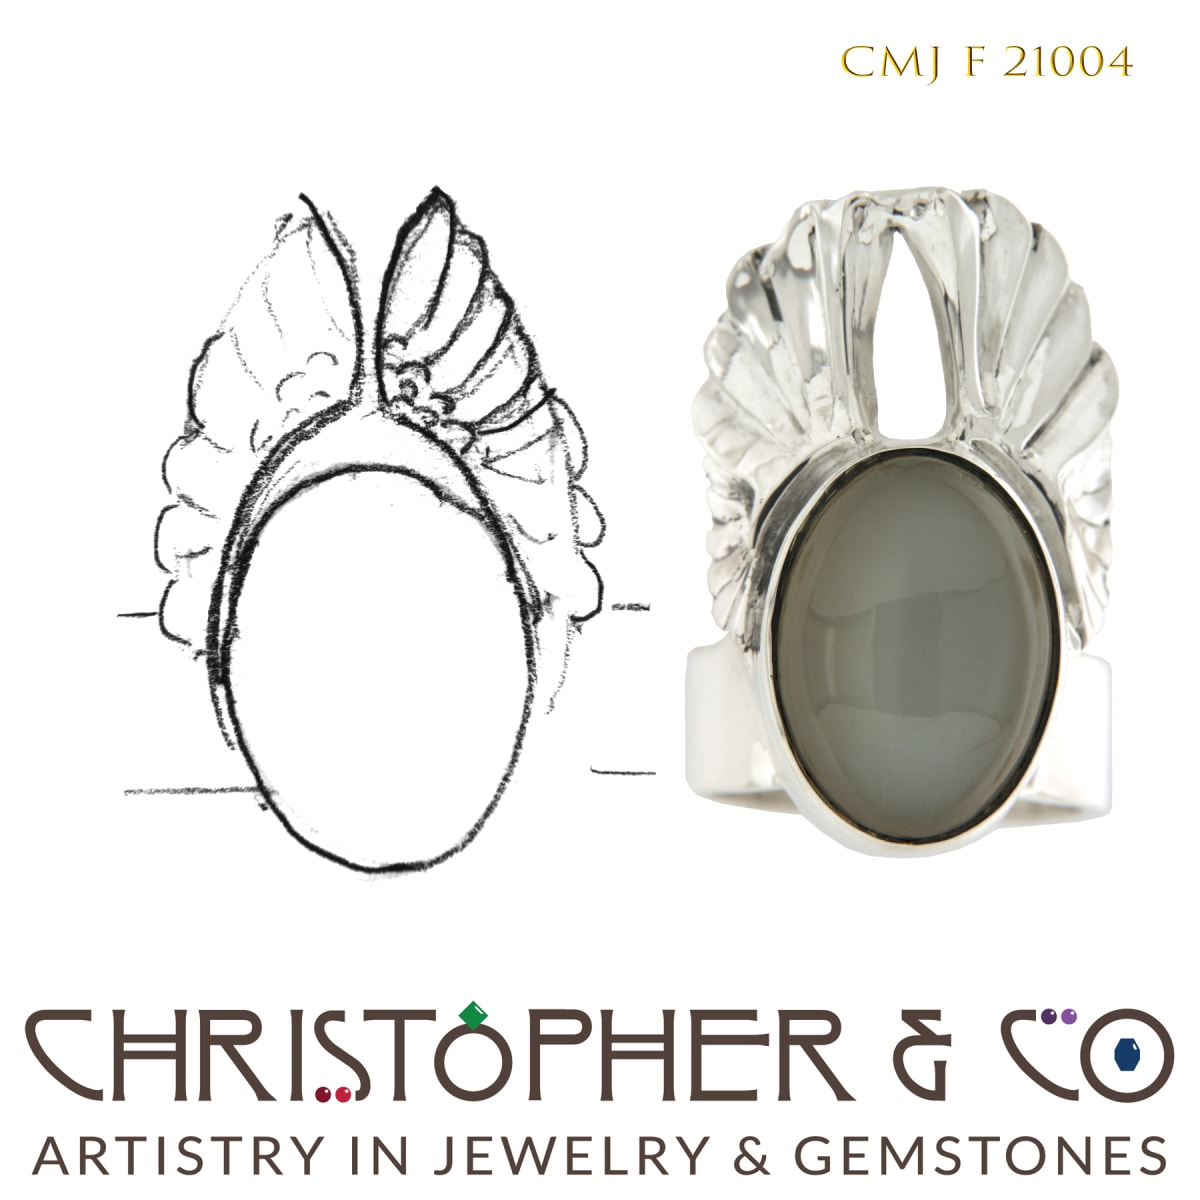 CMJ F 21004  Sterling Silver Ring designed by Christopher M. Jupp. 